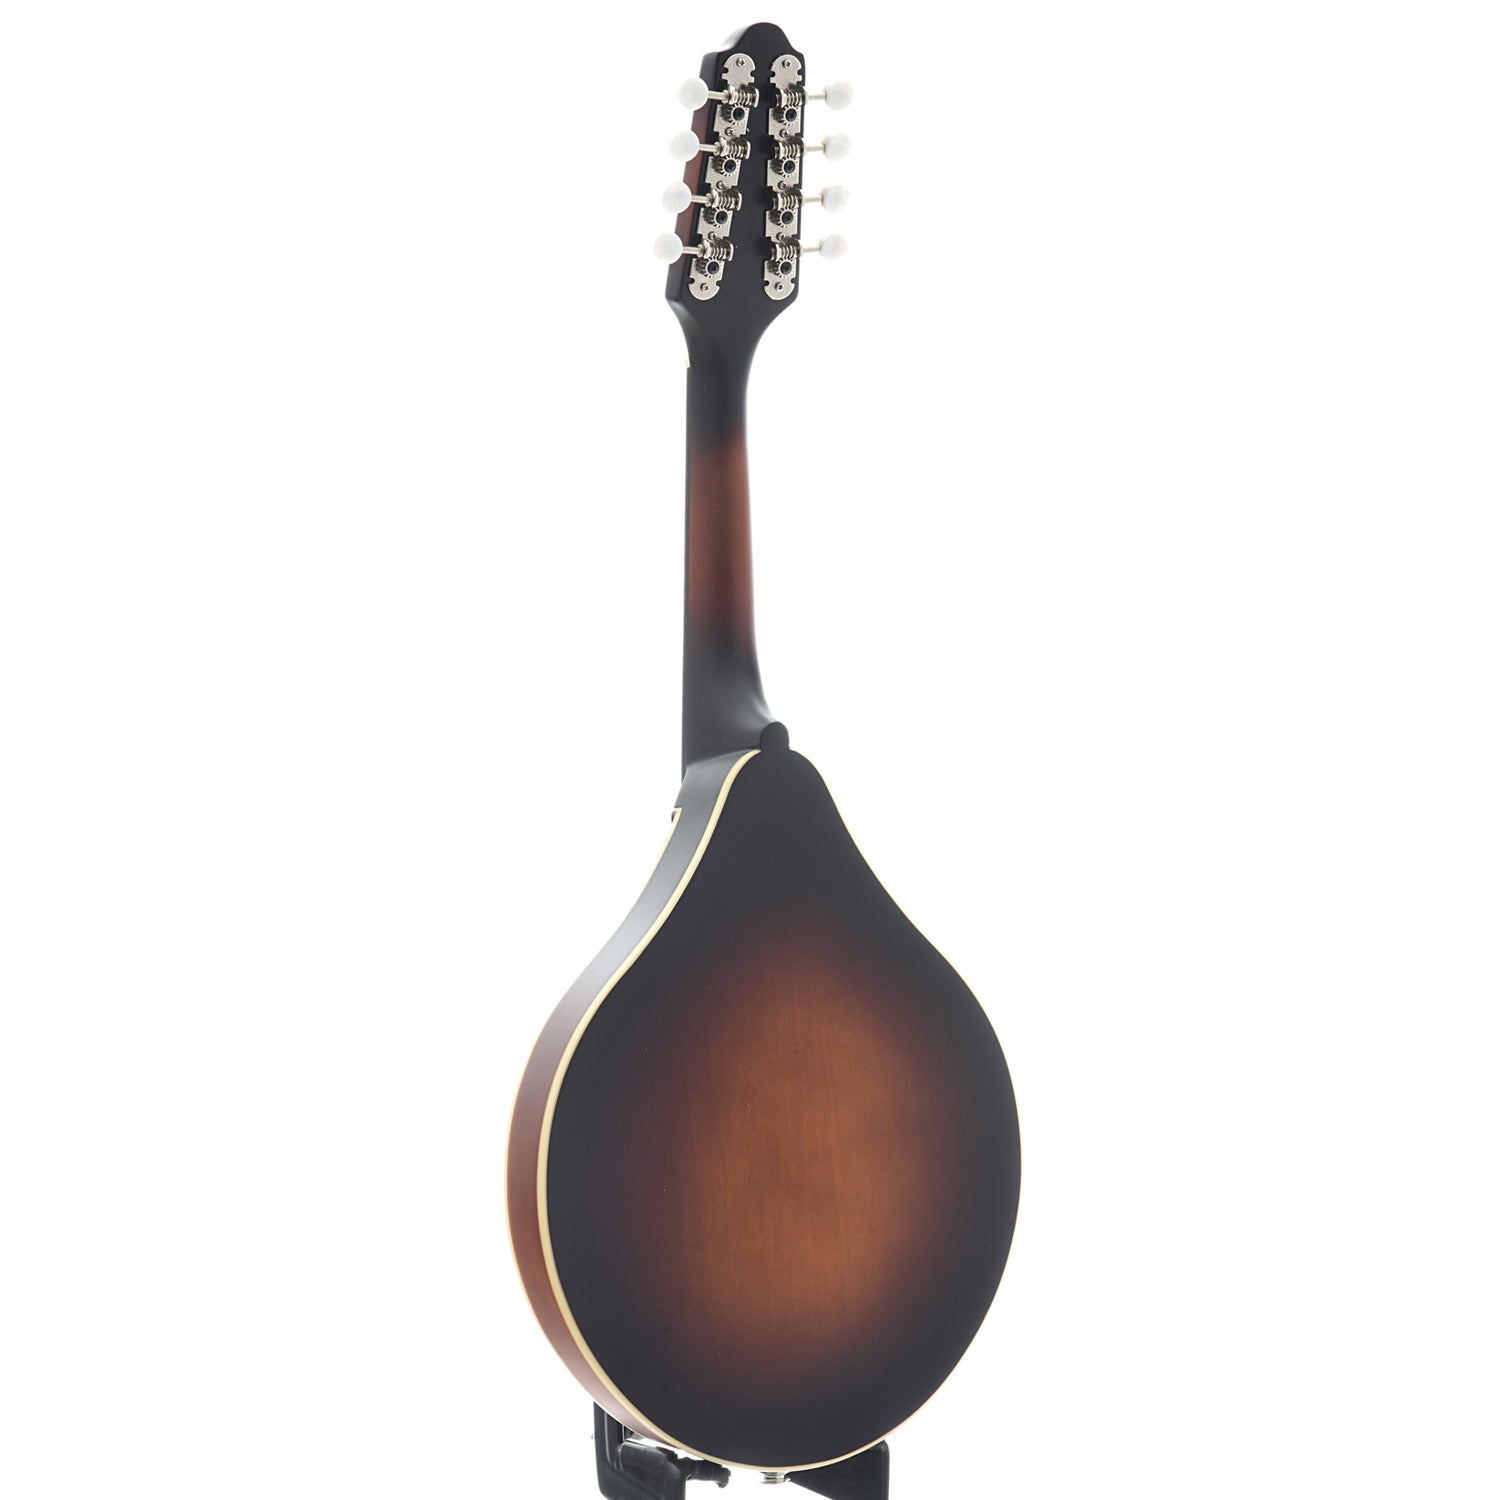 Full back and side of The Loar "Honey Creek" A-Style Mandolin 